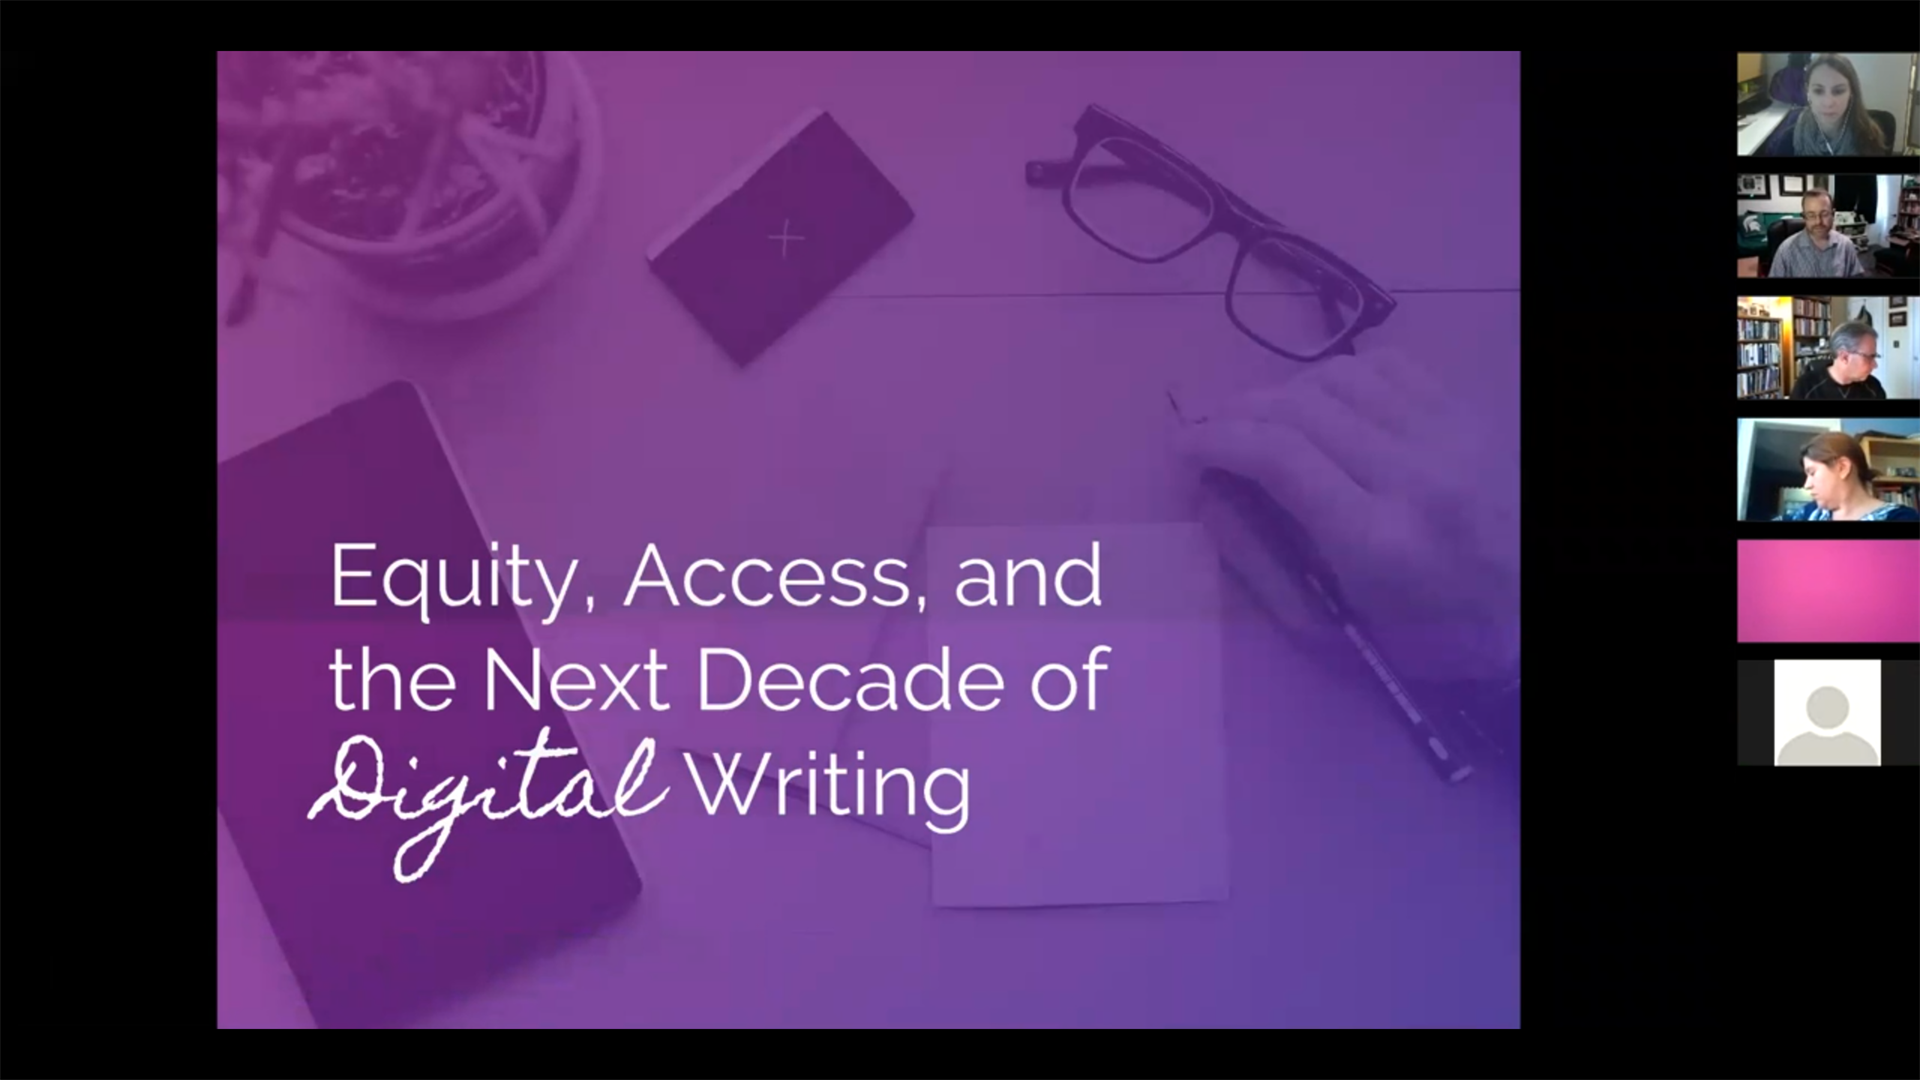 Webinar Screen Capture: Slide title "Equity, Access, and the Next Decade of Digital Writing"